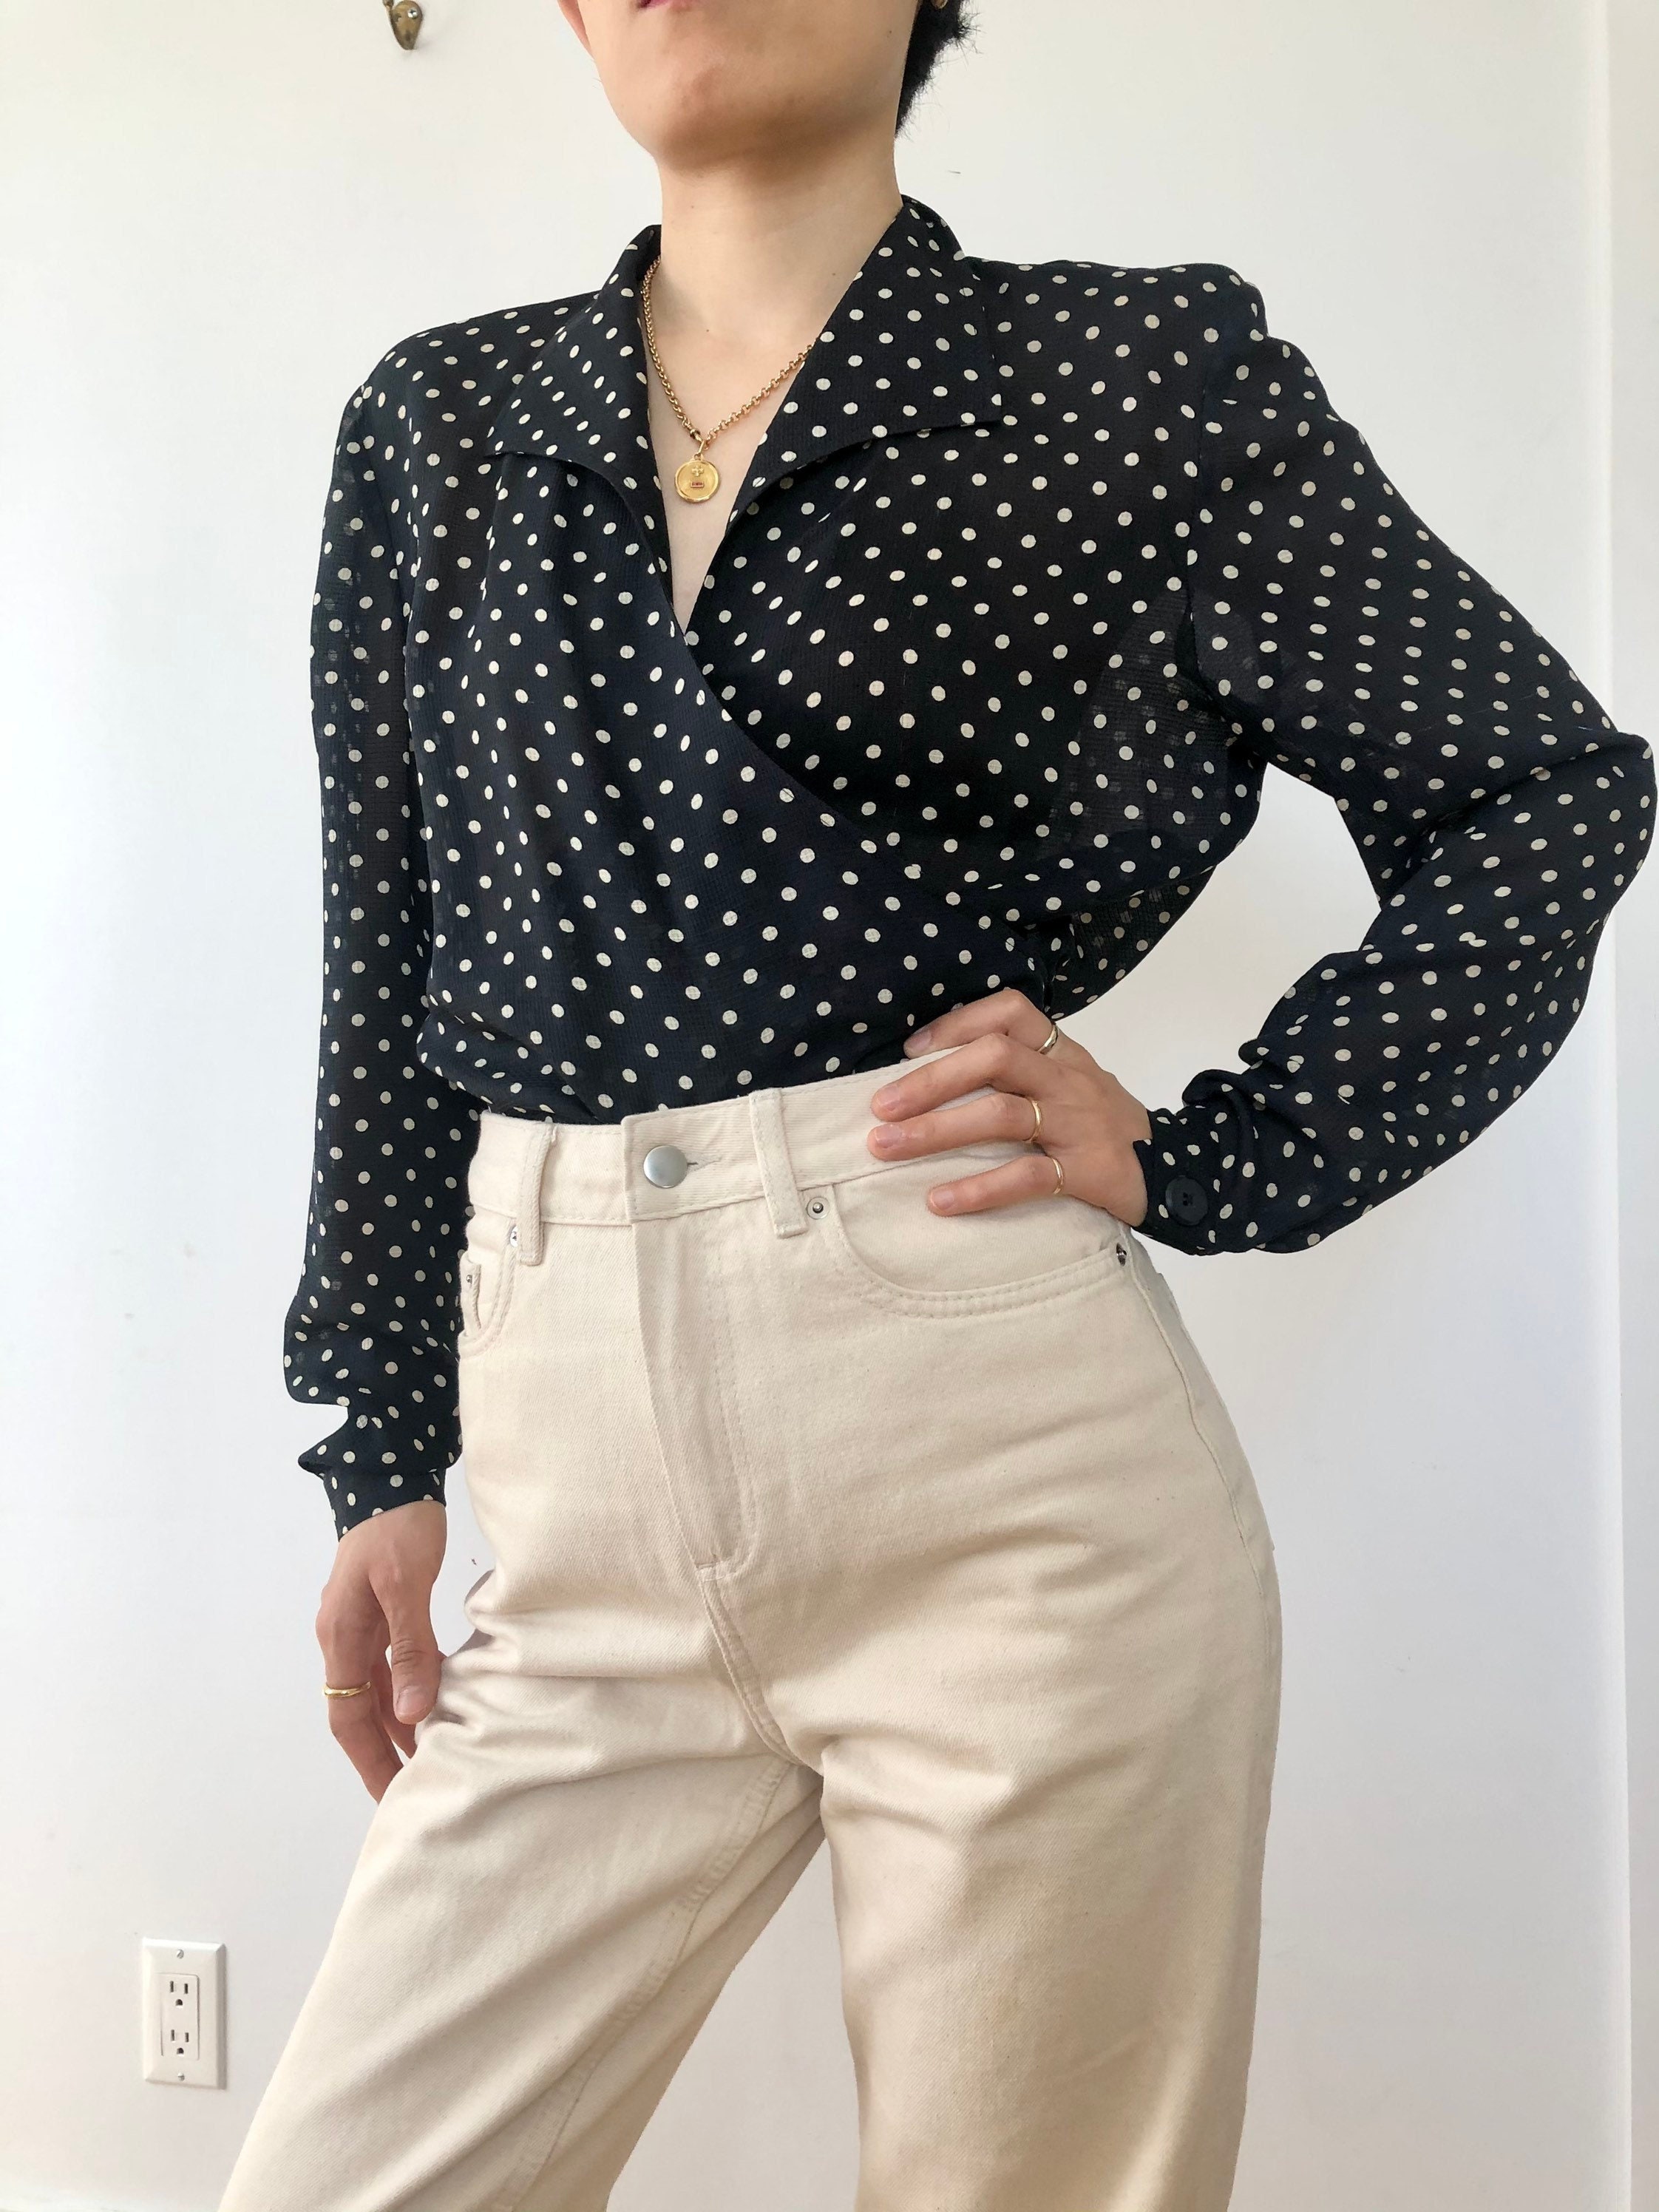 Button Down Blouse - Painted Dot Spice S